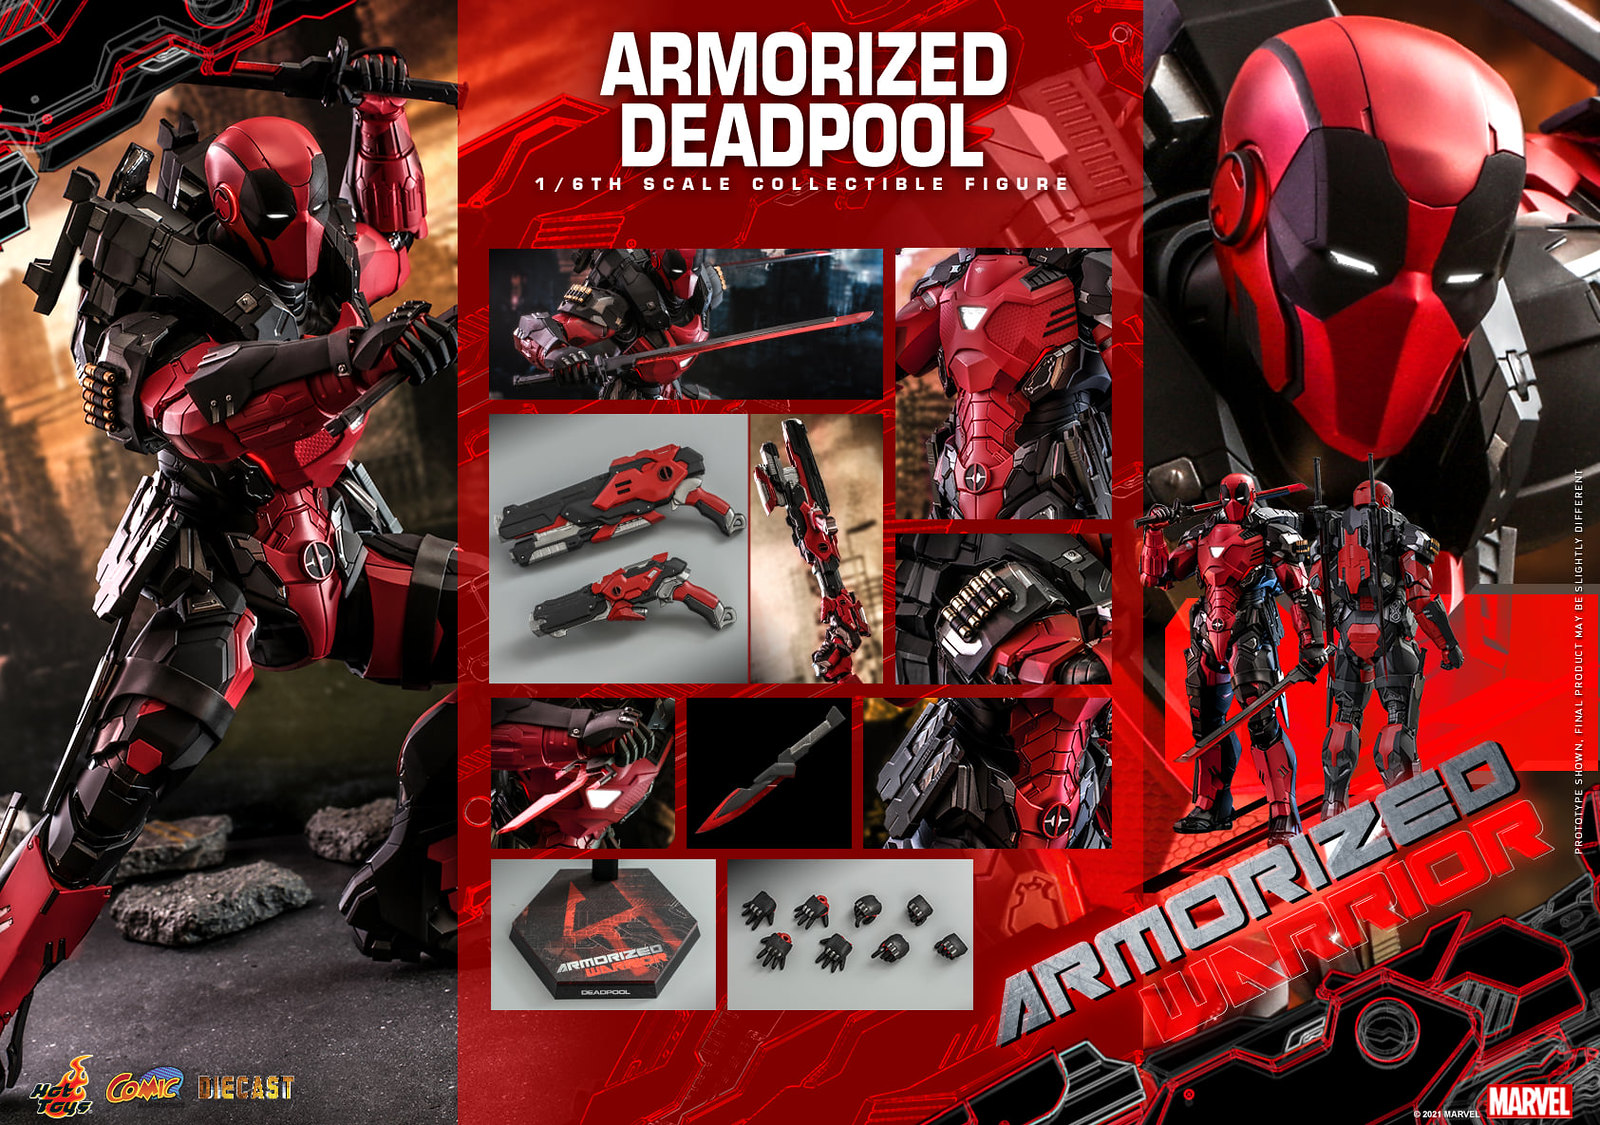 NEW PRODUCT: Hot Toys Armorized Warrior - 1/6th scale Armorized Deadpool Collectible Figure [Armorized Warrior Collection] 51310496172_01ebfc30b0_h